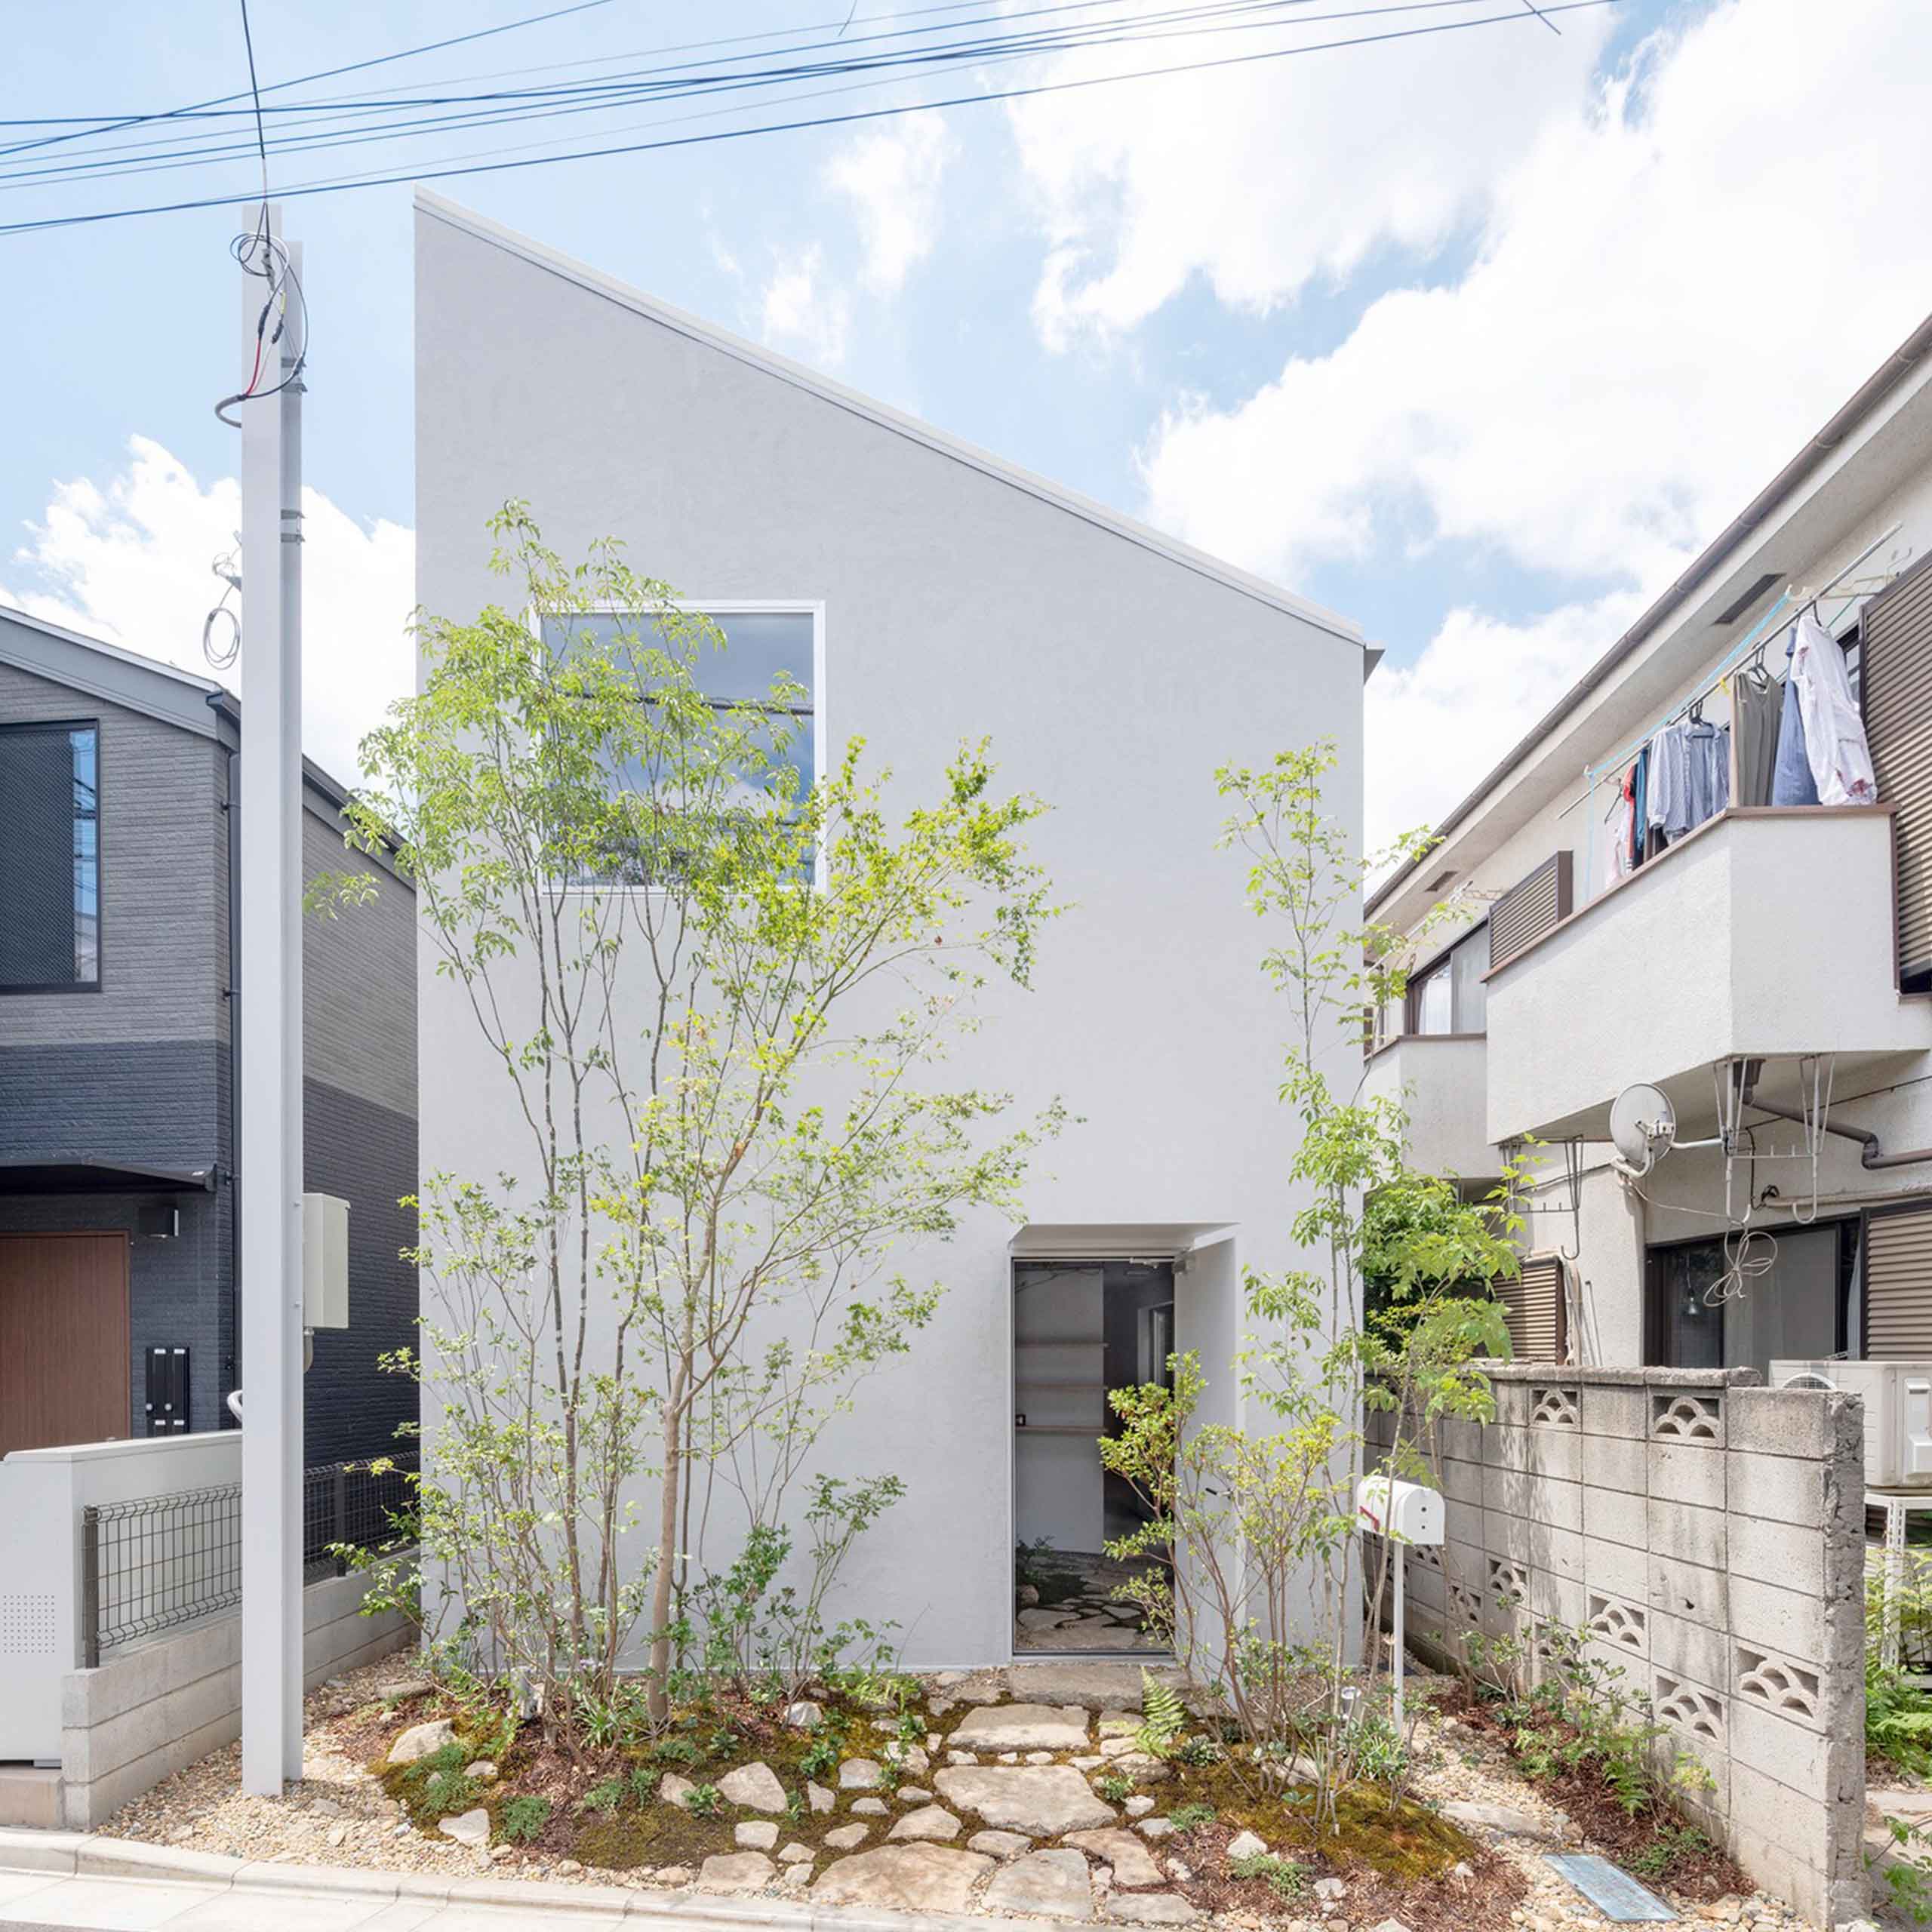 A small modern Japanese home with a white walls and pitched roof on a narrow lot.